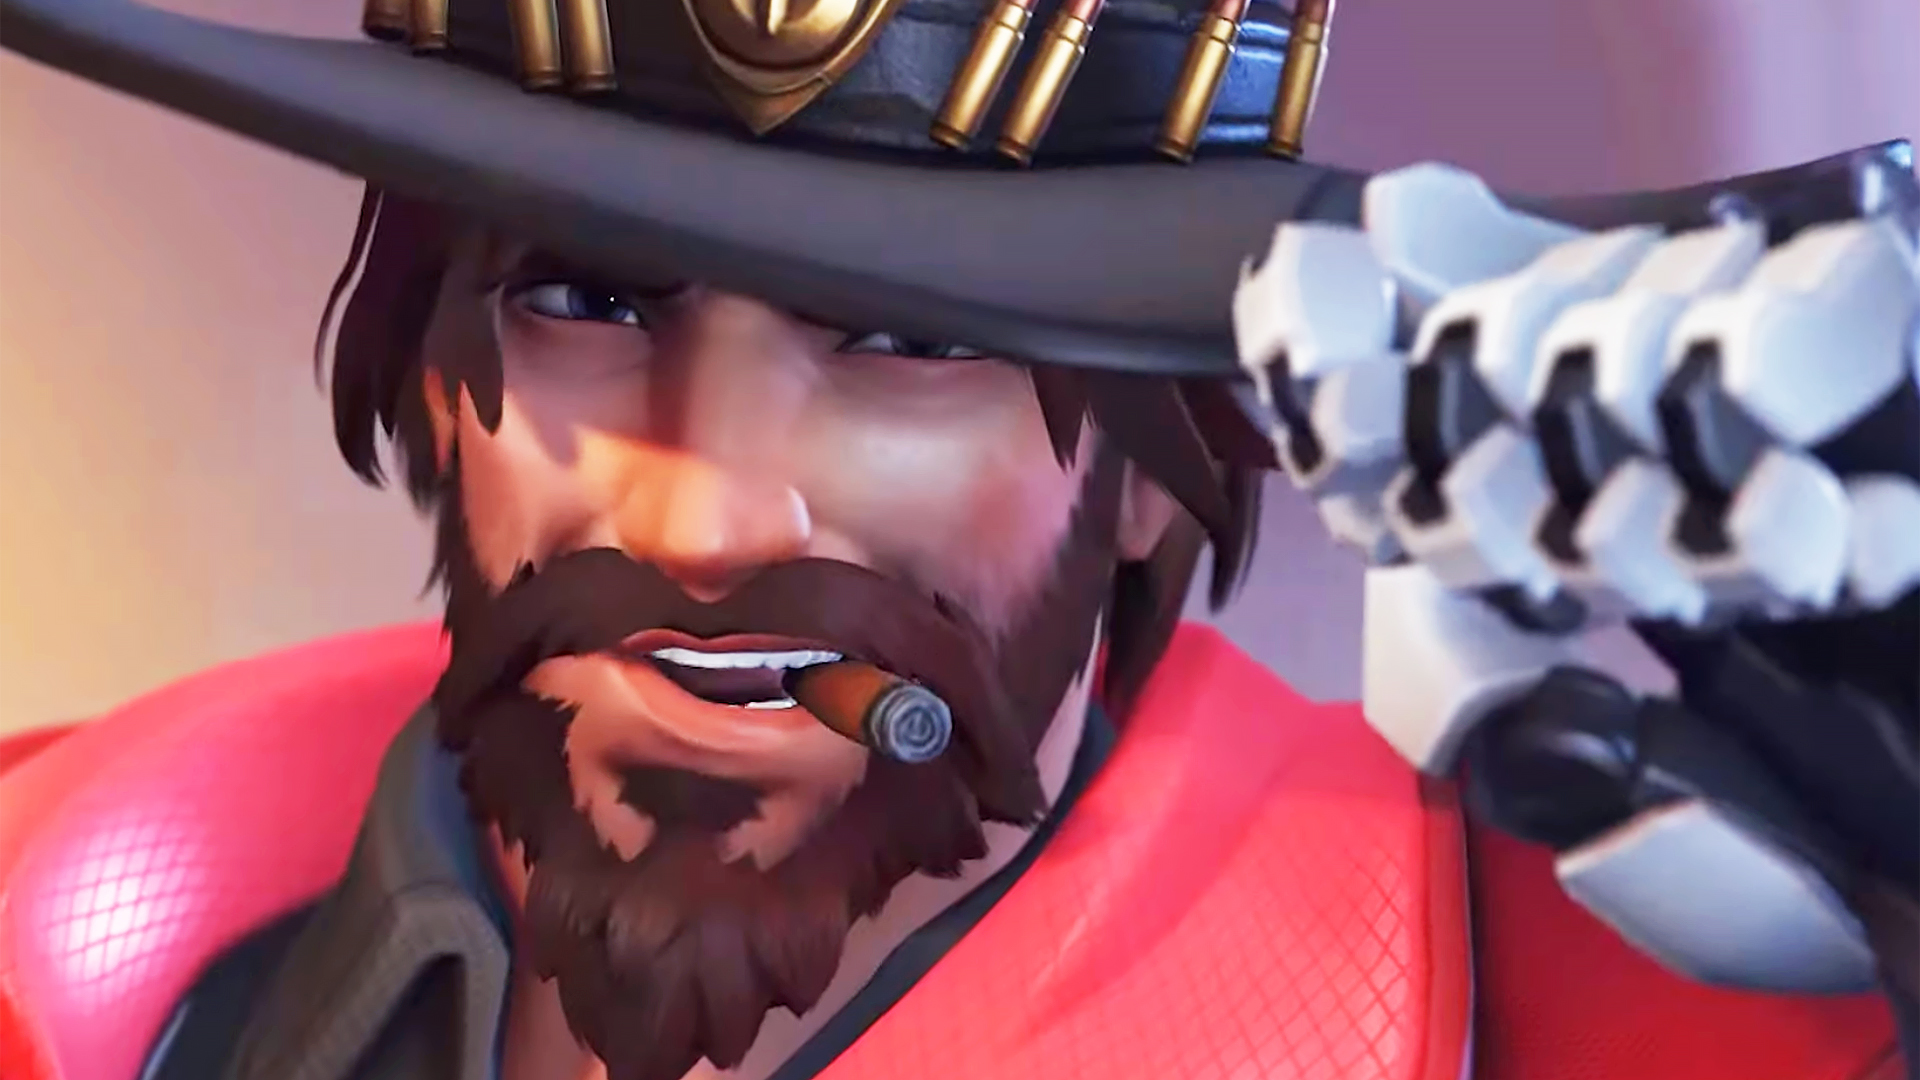  Blizzard says Overwatch matches sometimes turn into 'stomps' because that's, like, just the nature of things 